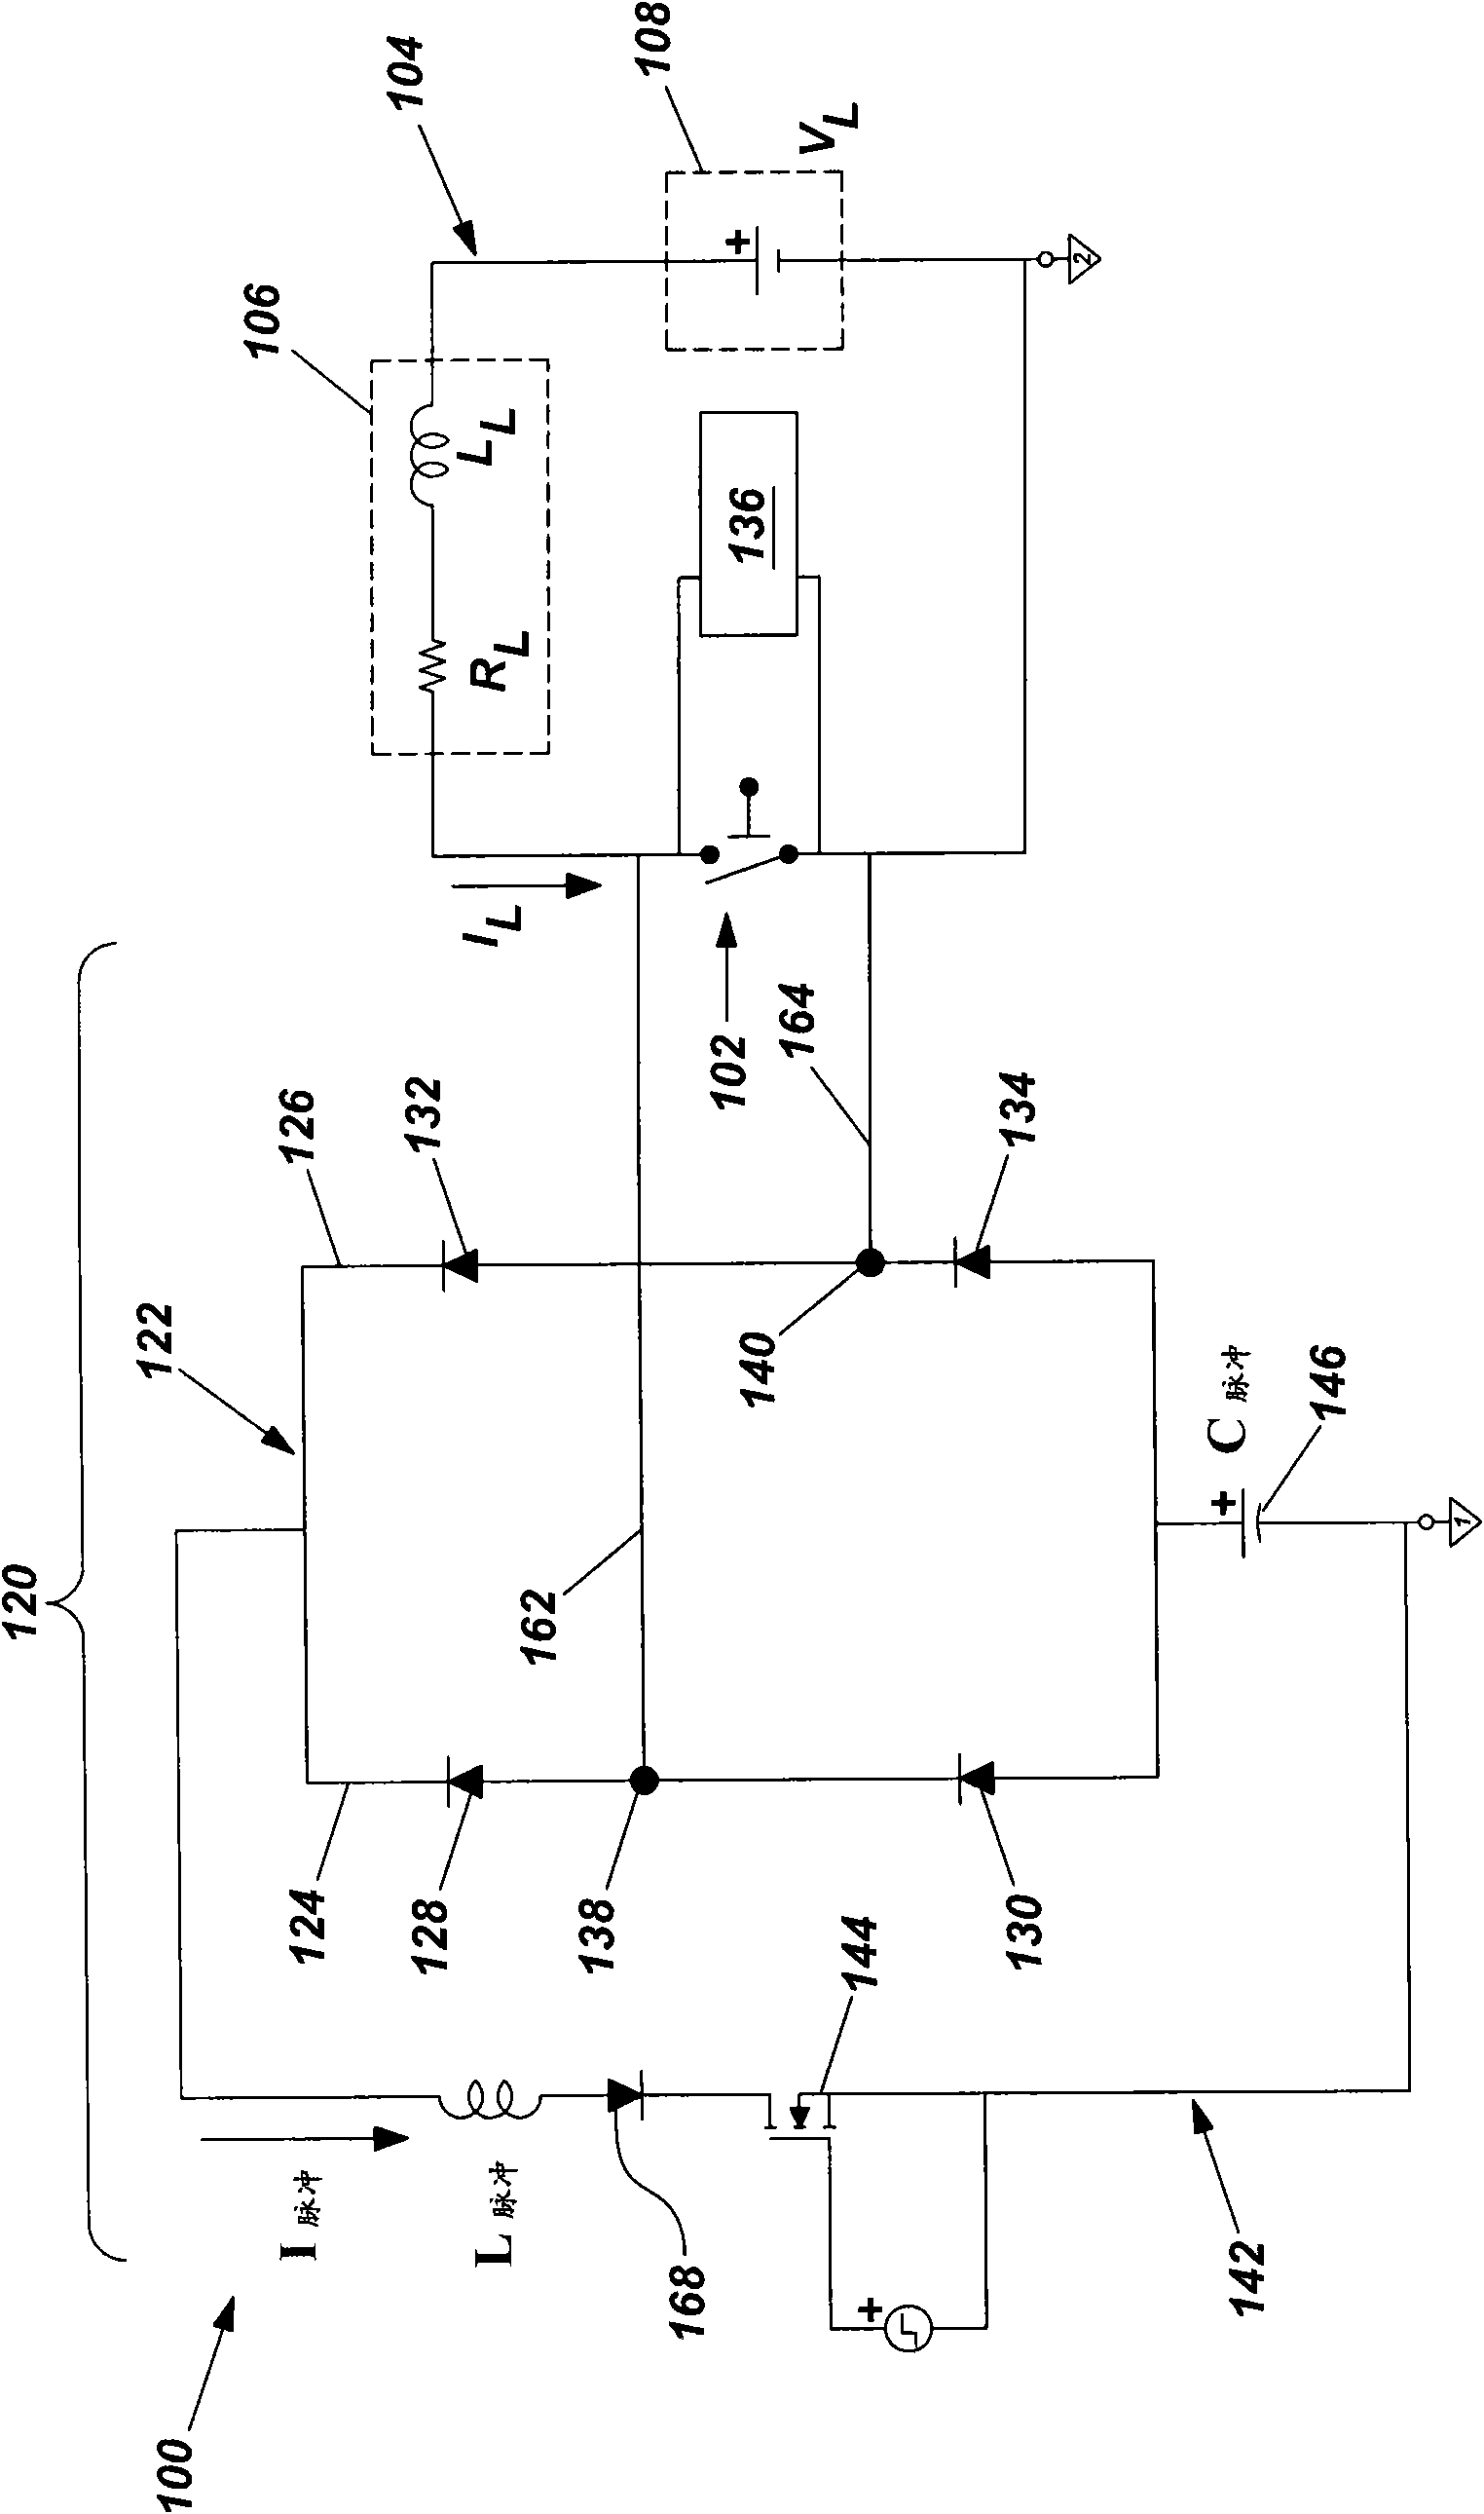 Switch structure and associated circuit